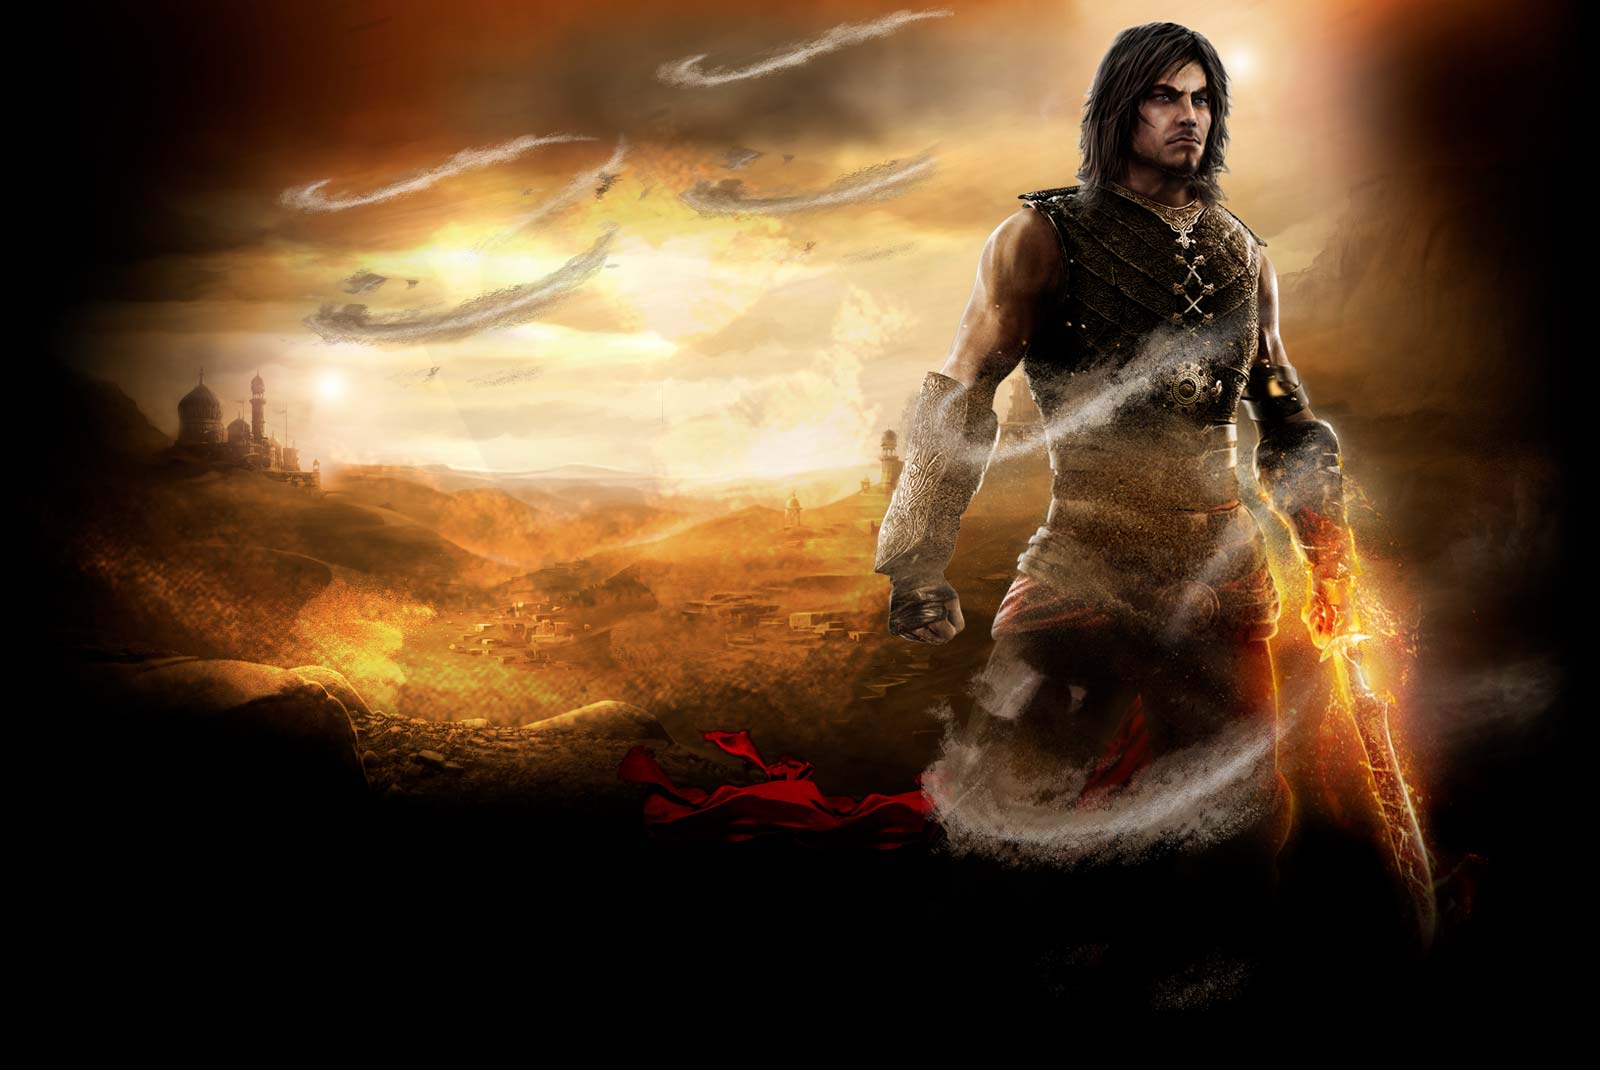 image For > Prince Of Persia 7